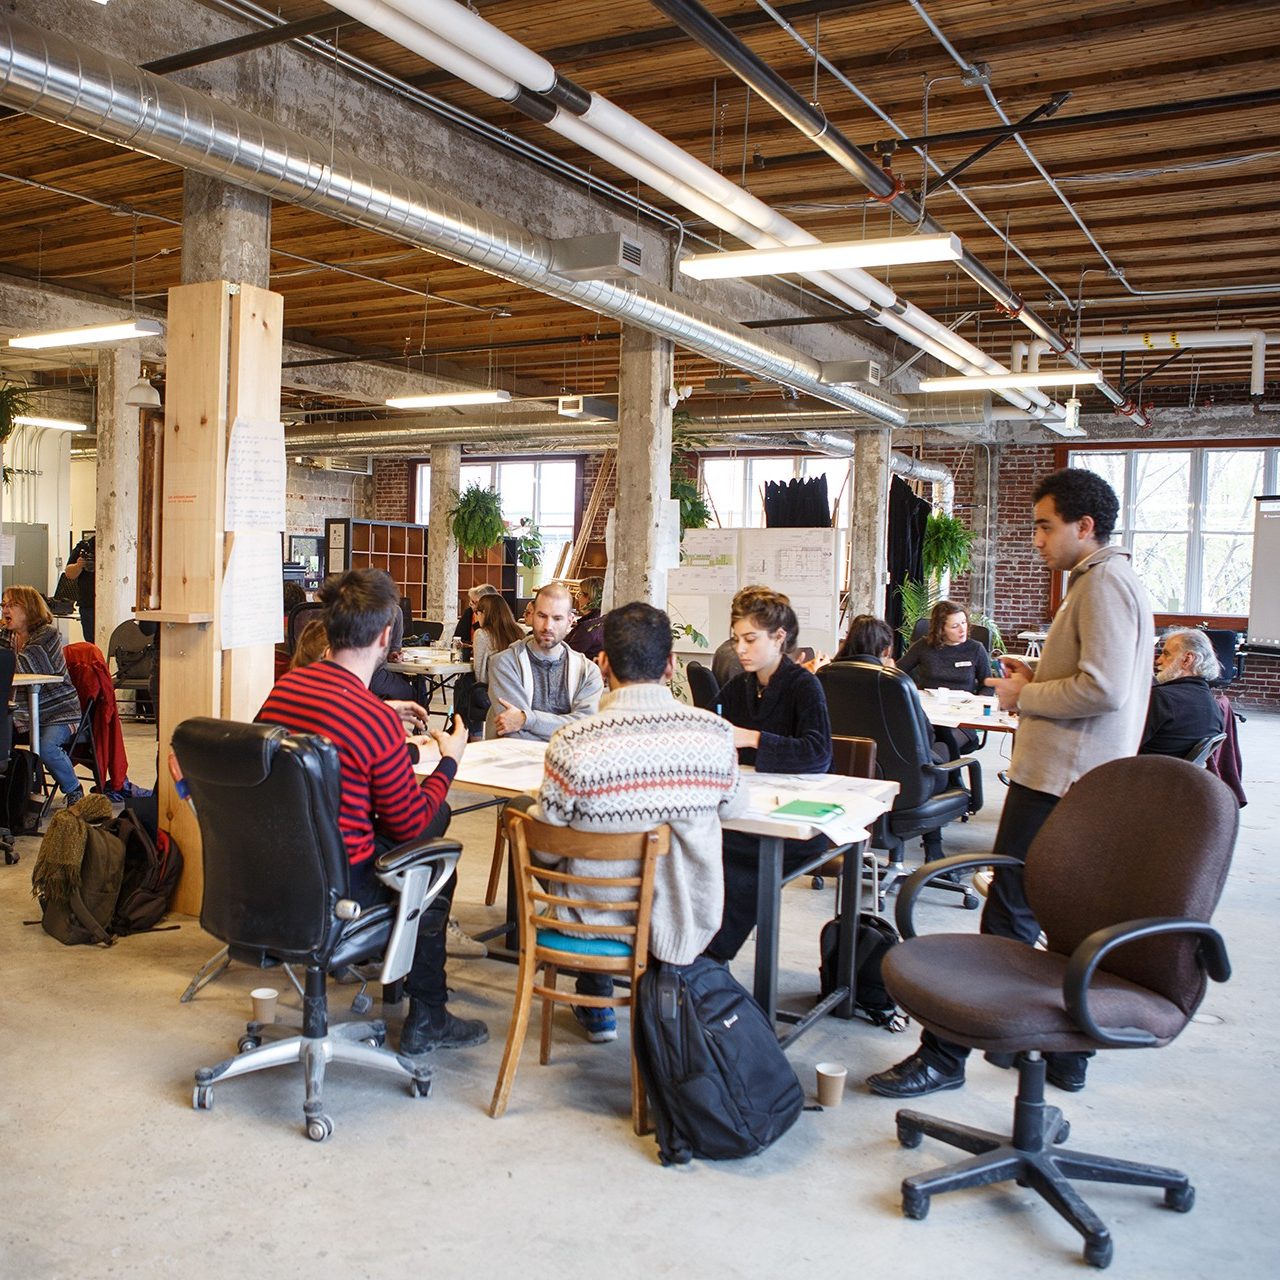 A number of people gather in groups to collaborate around large tables in an open workshop space with exposed beeams, ceilings, and brick walls. Plants and whiteboards are dotted throughout the space.